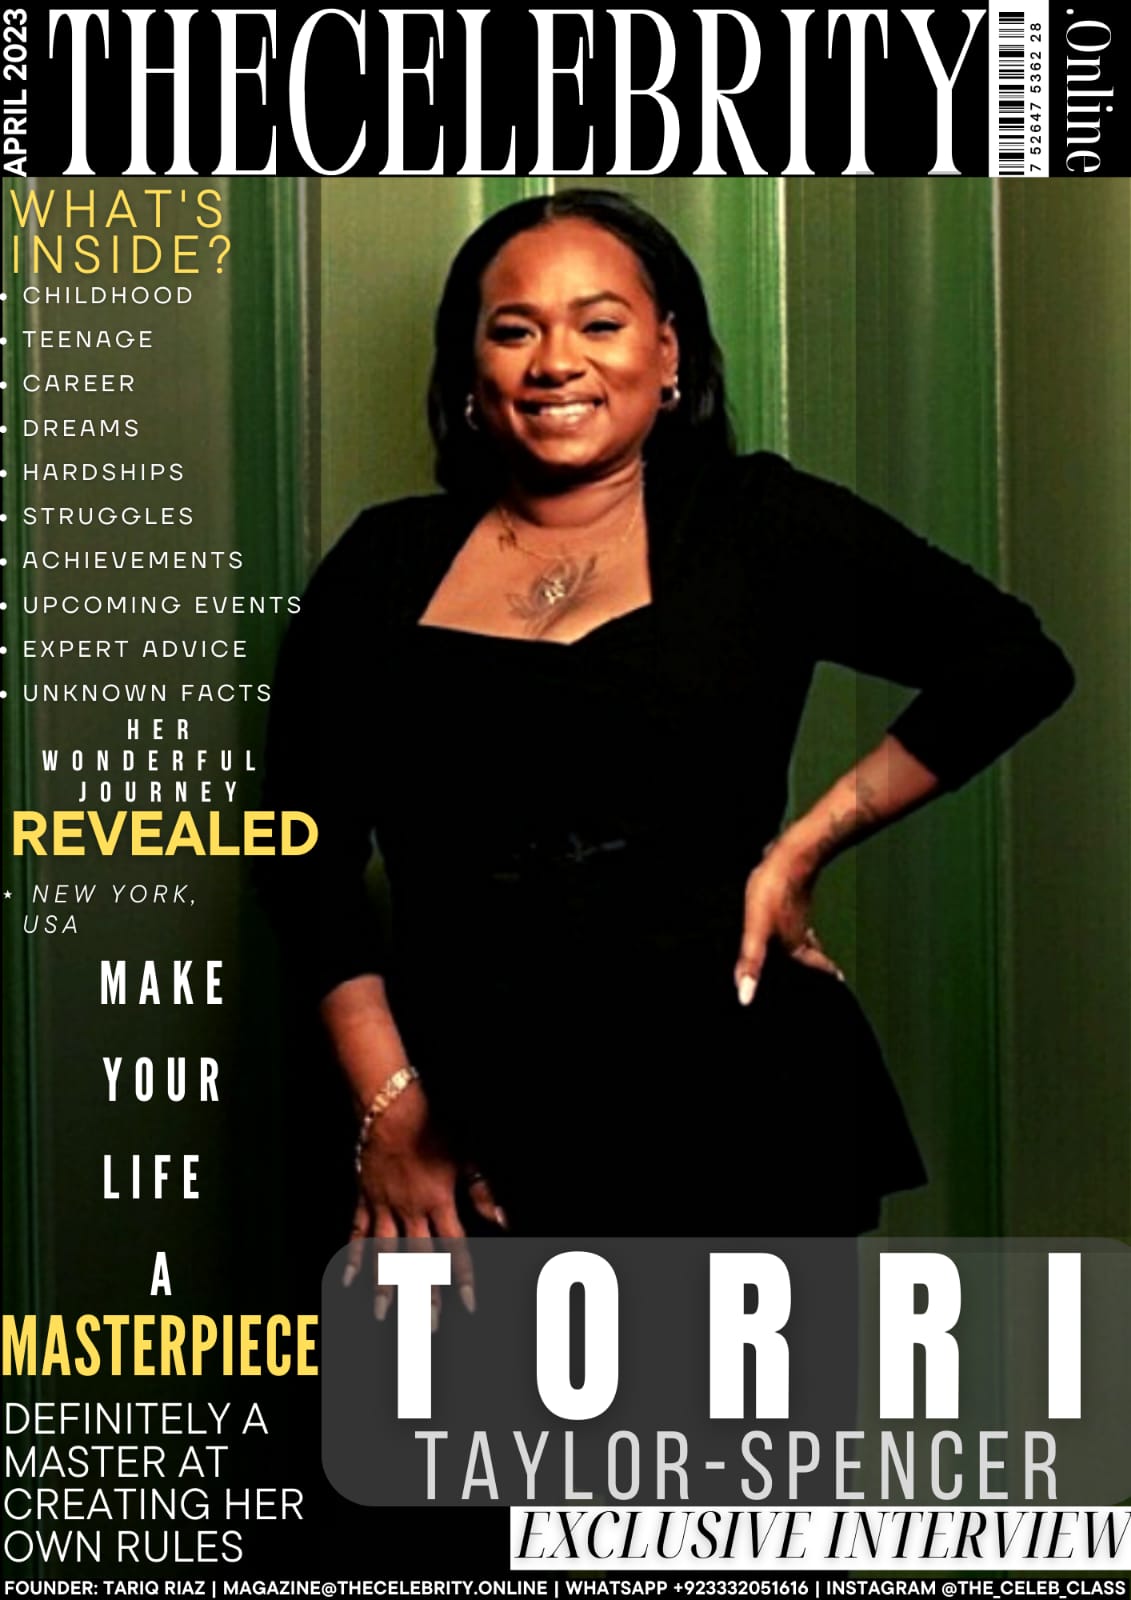 Torri Taylor-Spencer Exclusive Interview – We cannot pour into others from an empty cup